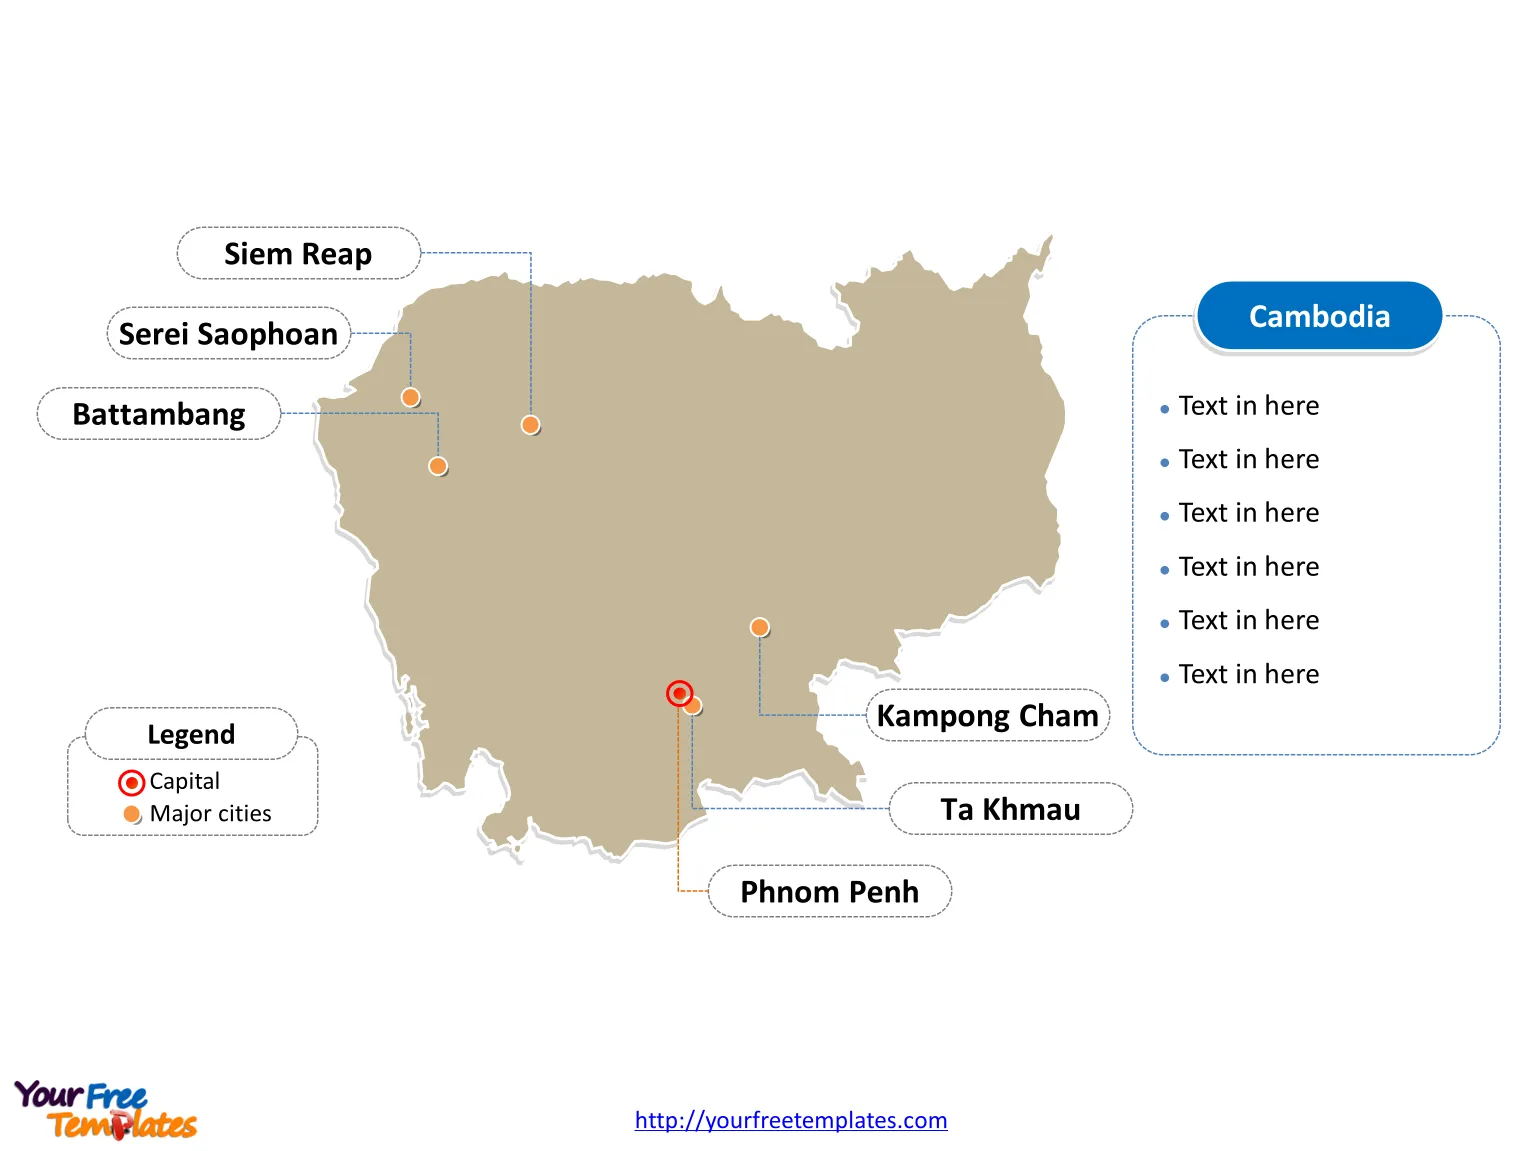 Cambodia Outline map labeled with cities